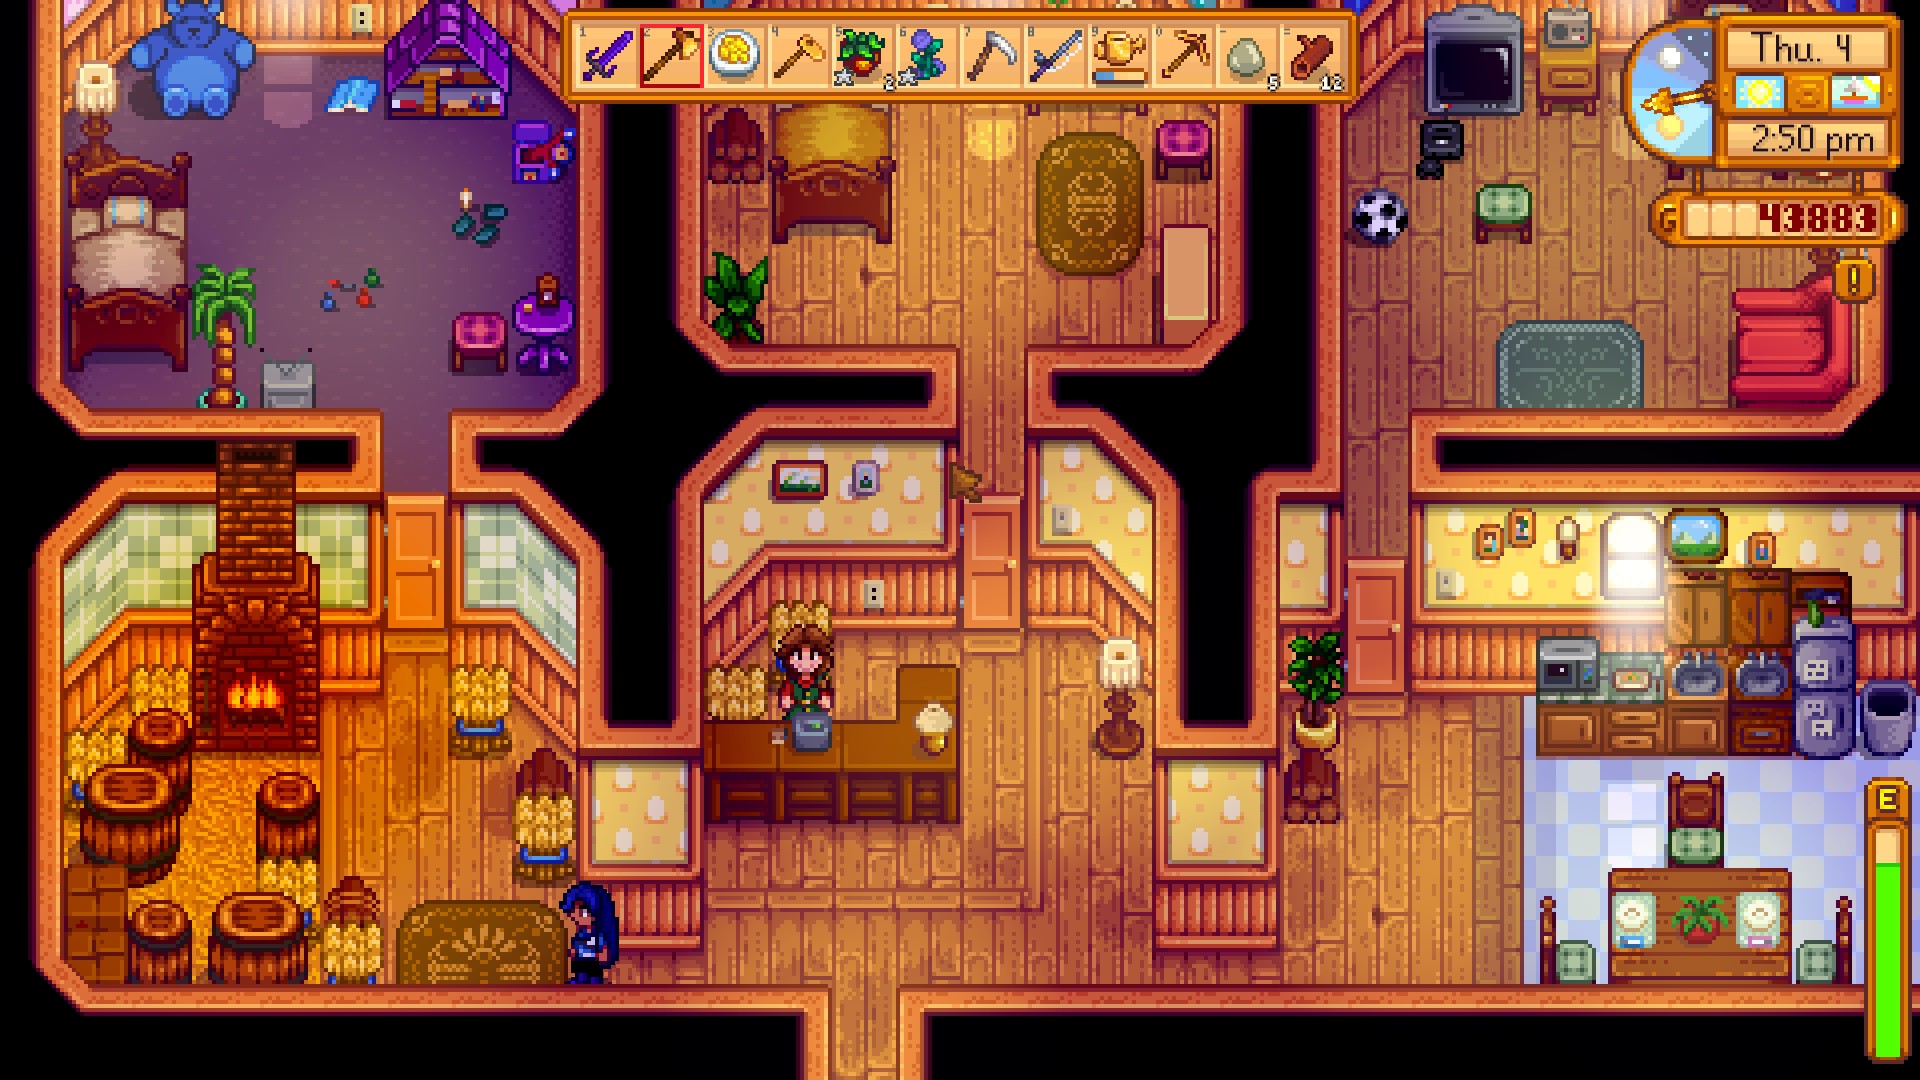 The layout of Marnie's farmhouse can be seen here. It is six rooms, three in the front and three in the back. Marnie is in the front middle room, standing behind a counter where she does business. She is a white woman with long brown hair, and she is wearing a red shirt with a green dress over it.